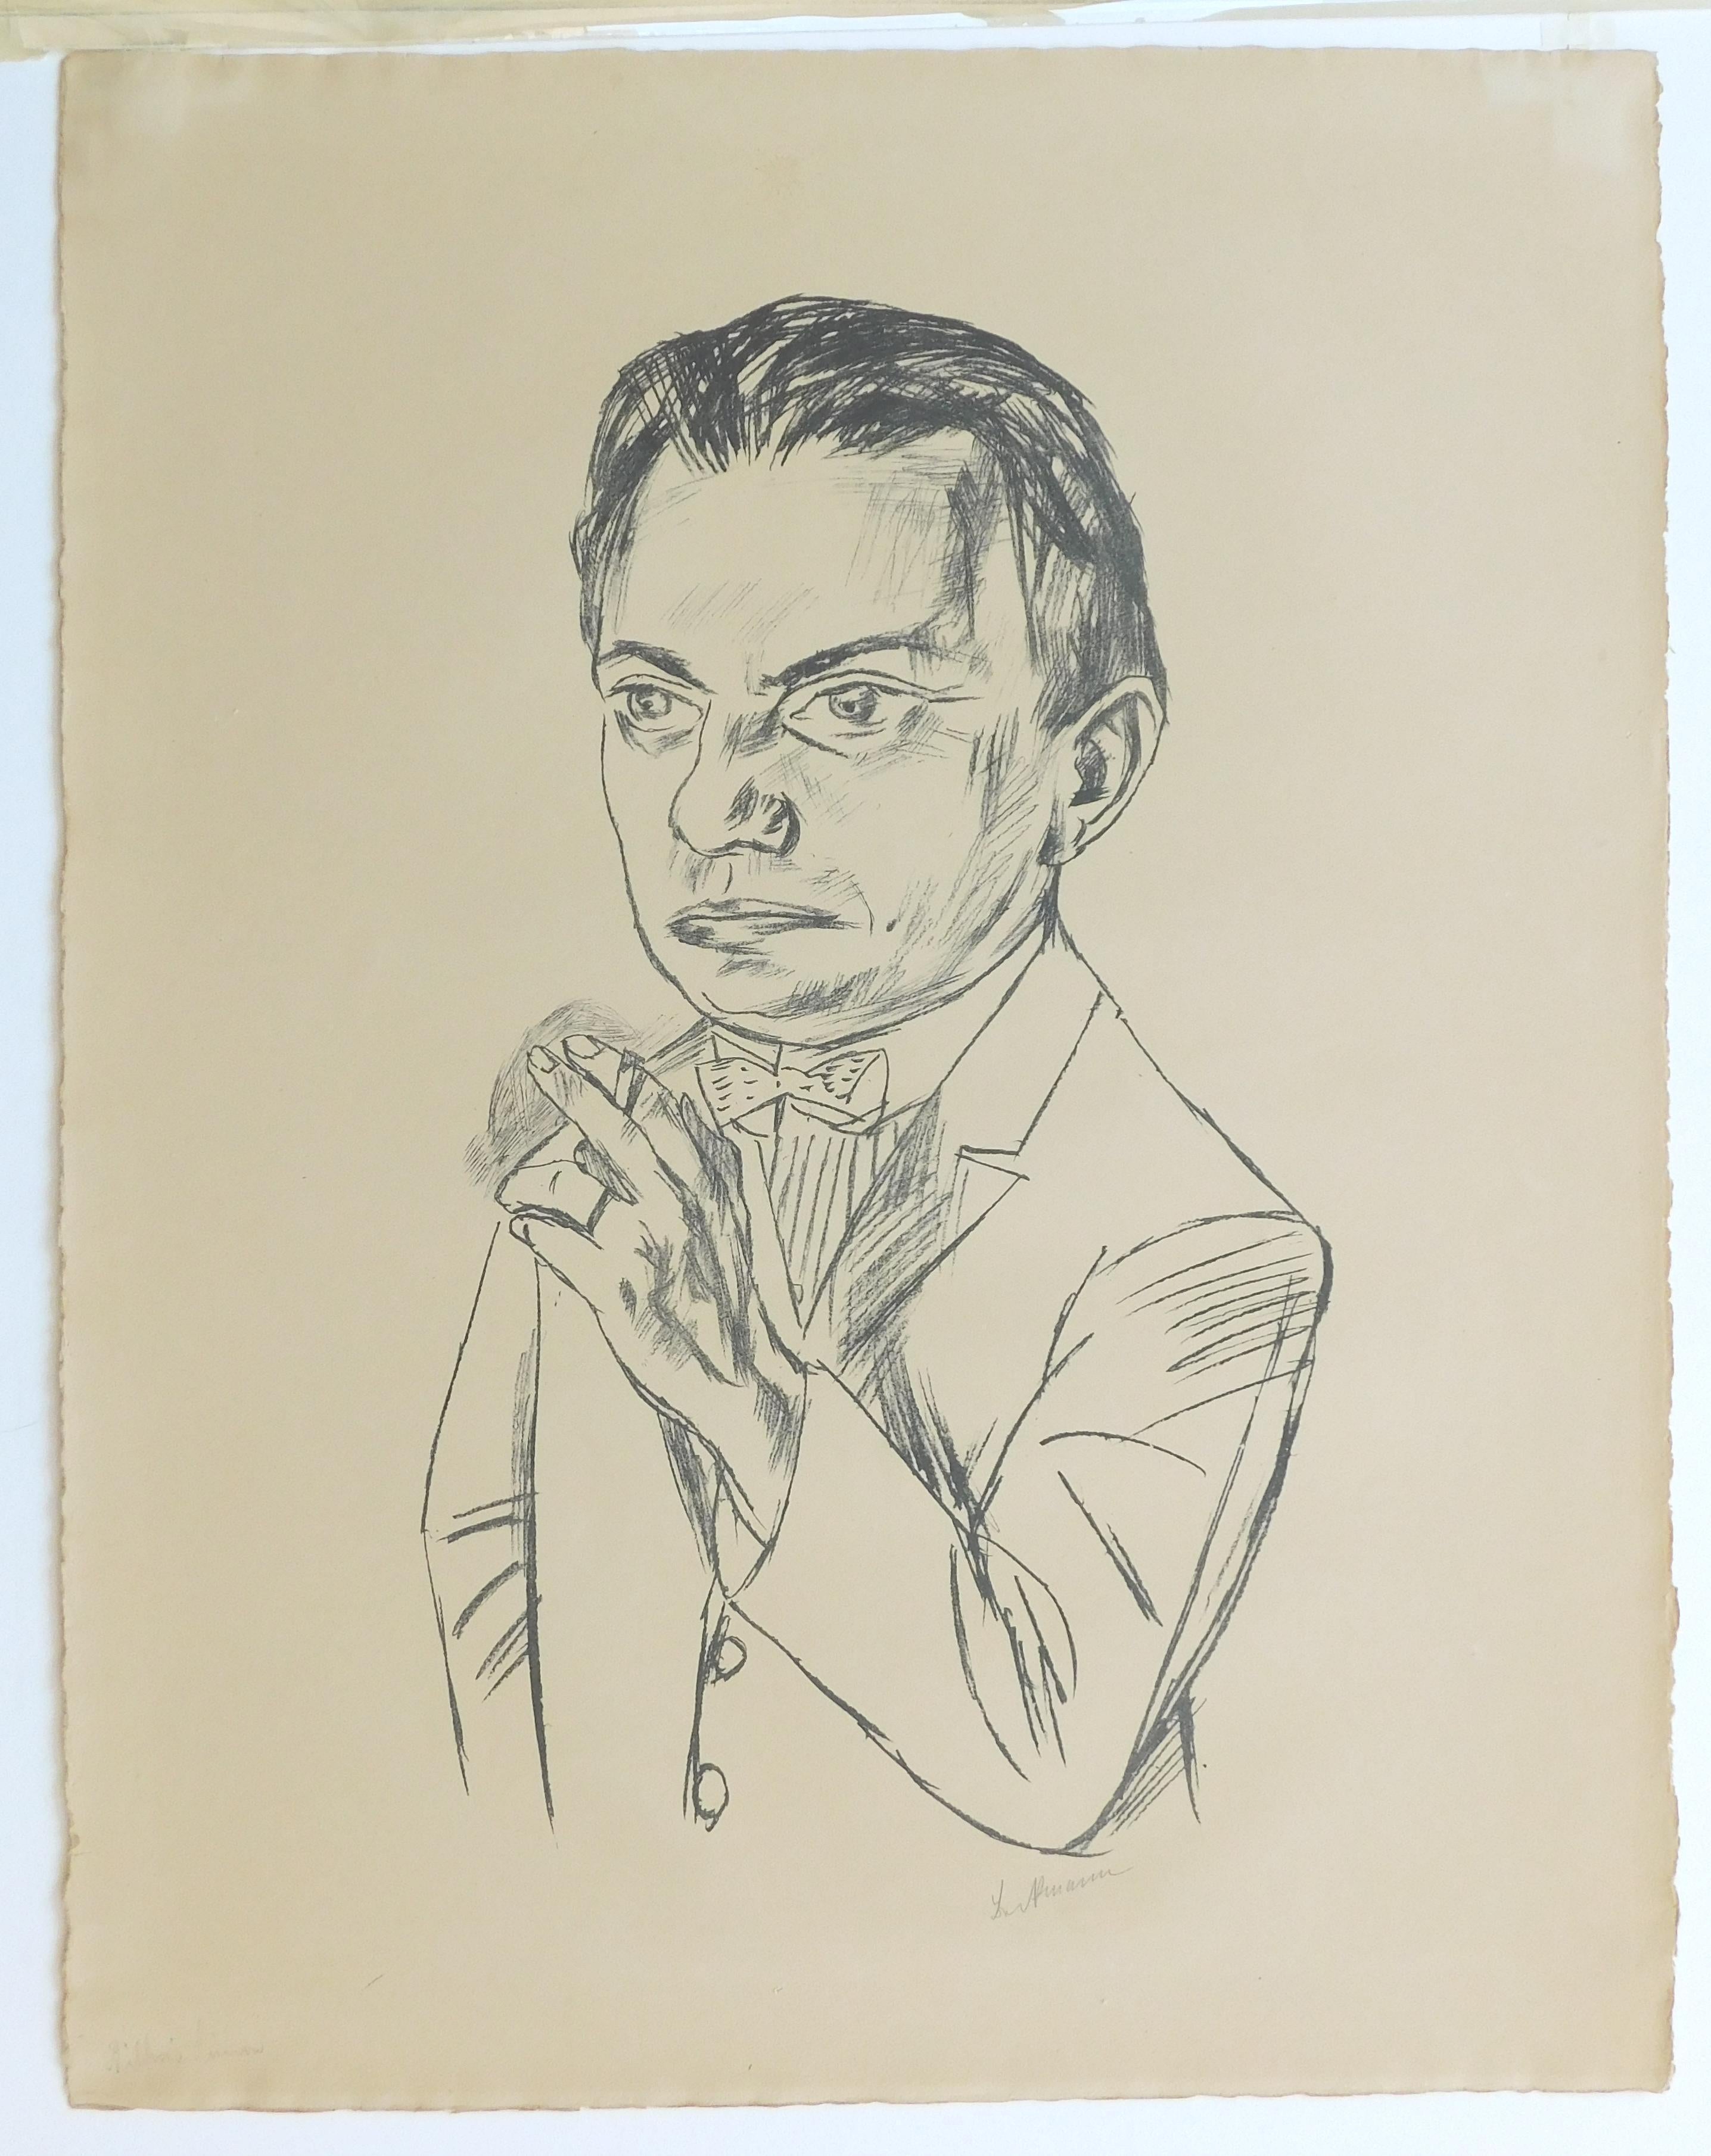 Original stone lithograph, a portrait by German Expressionist Max Beckmann.
Titled 